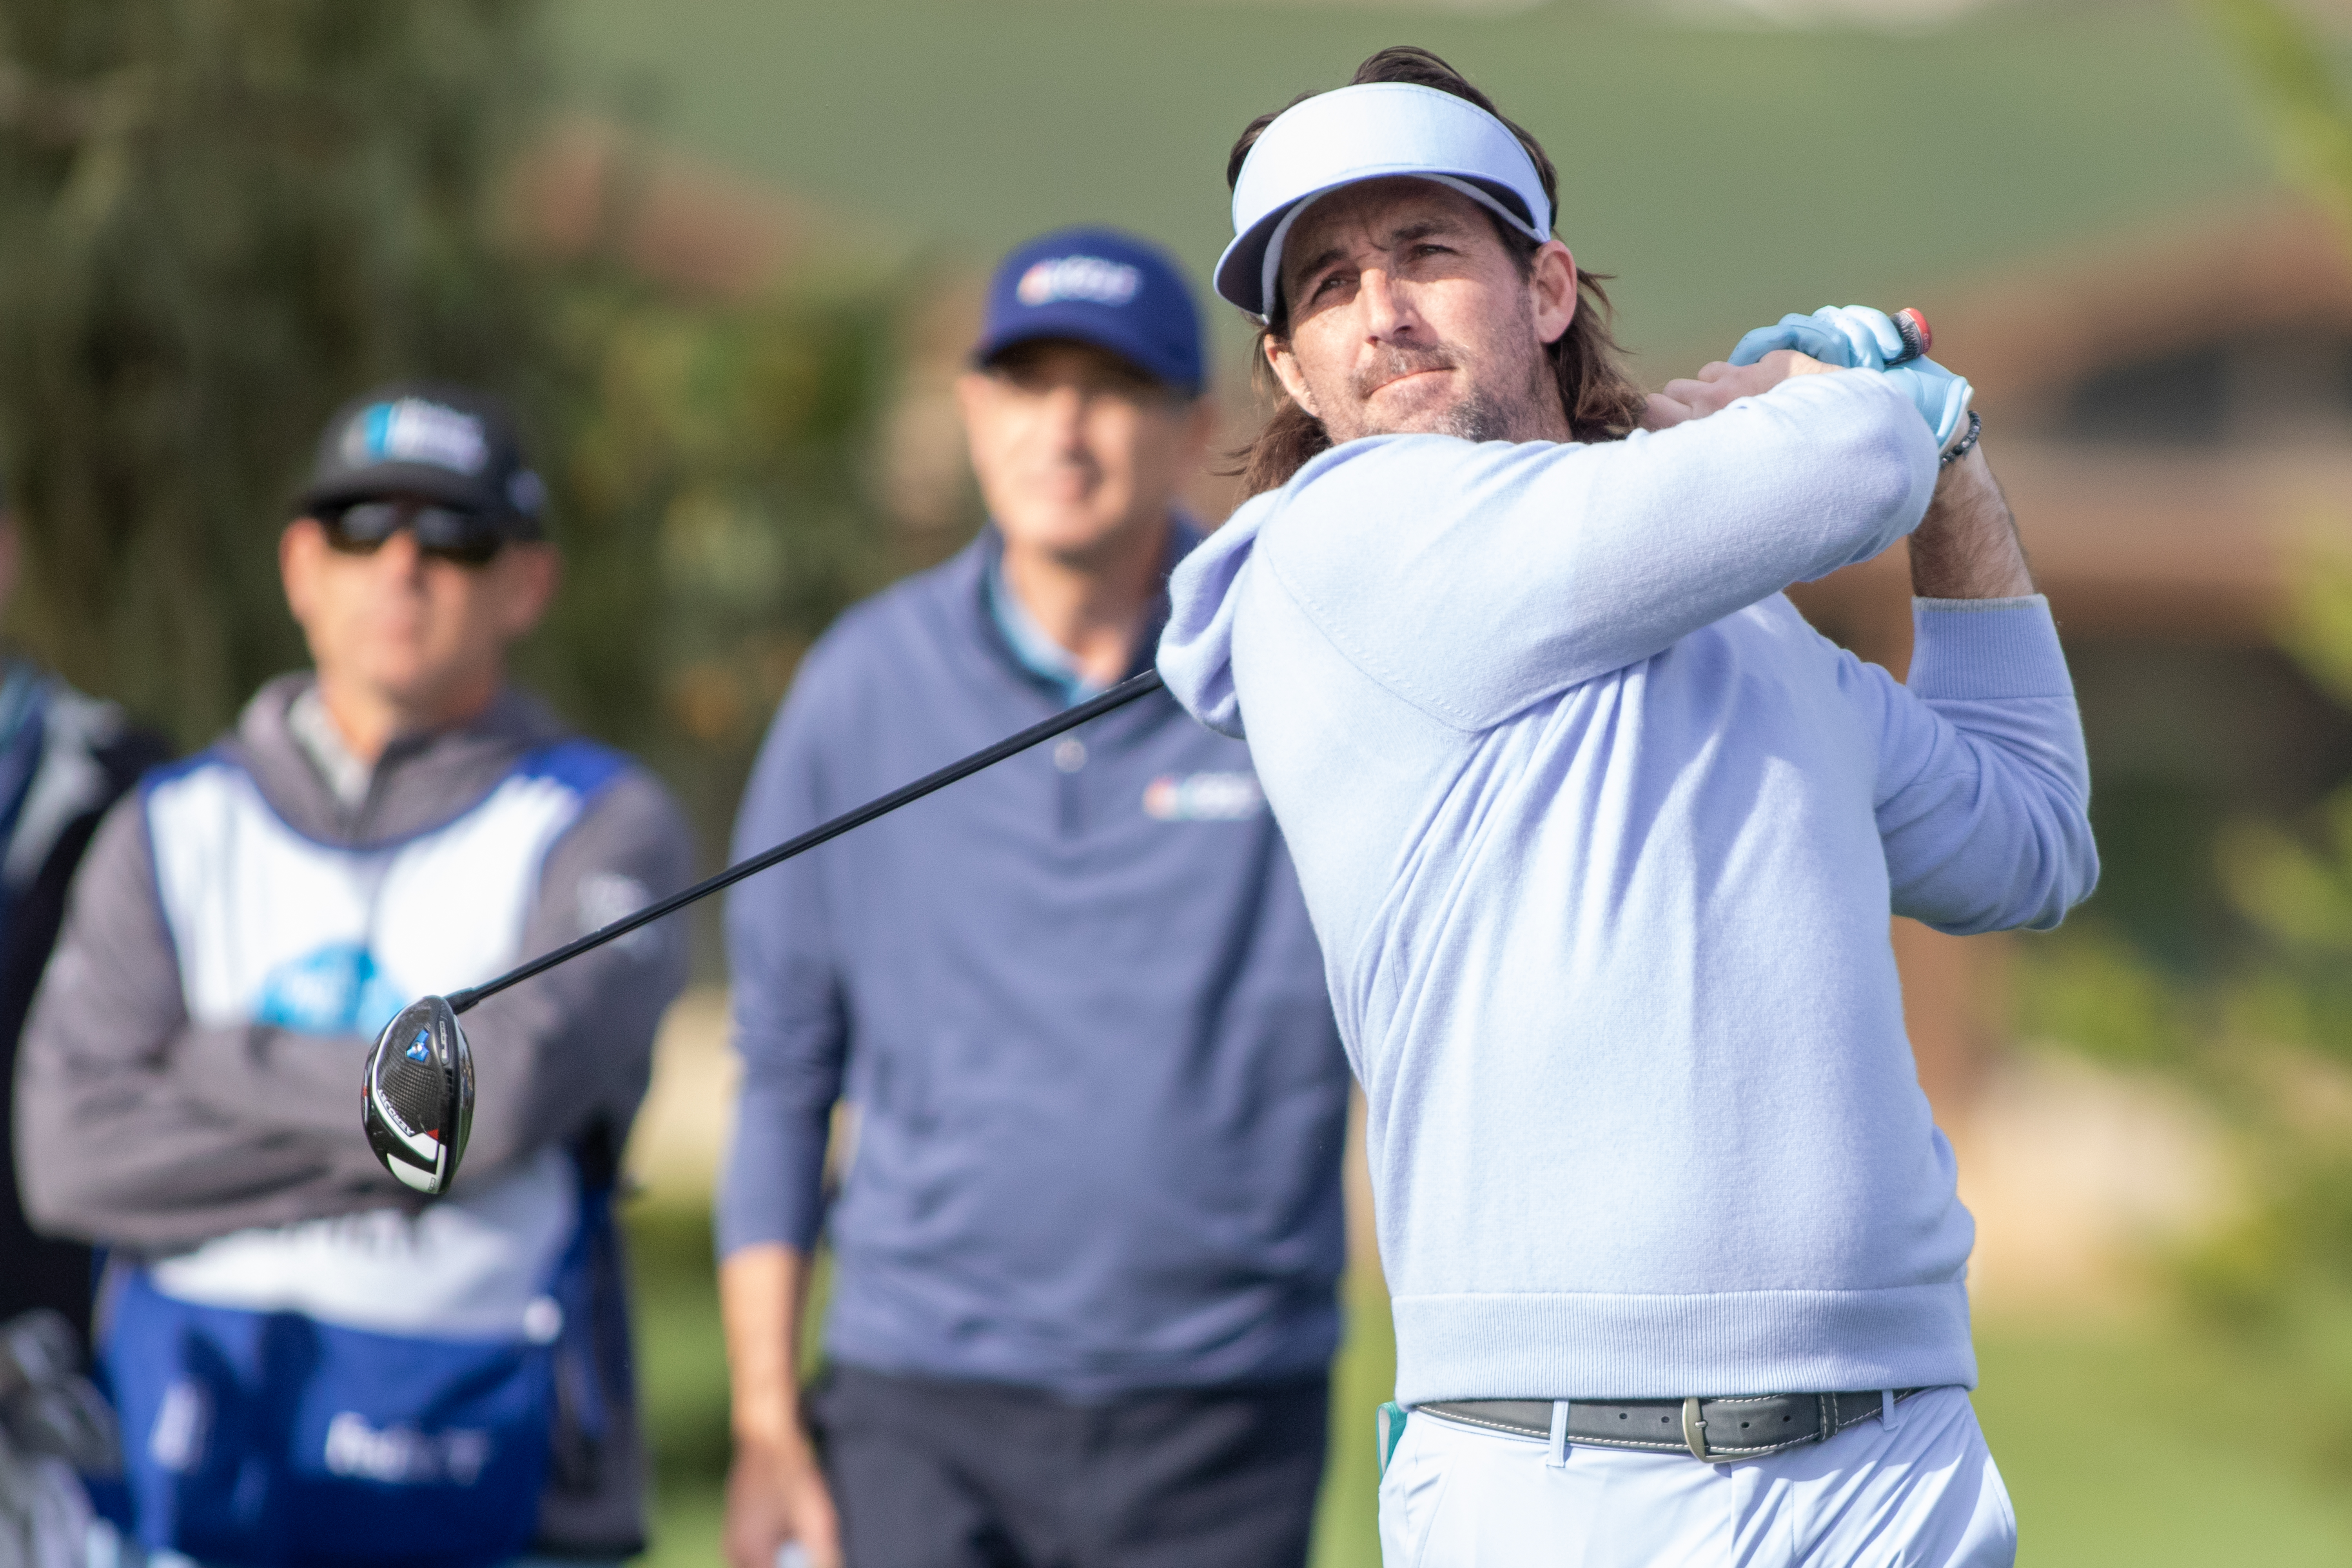 Jake Owen at the third round of the AT&T Pebble Beach Pro-Am on February 4, 2023, in California | Source: Getty Images